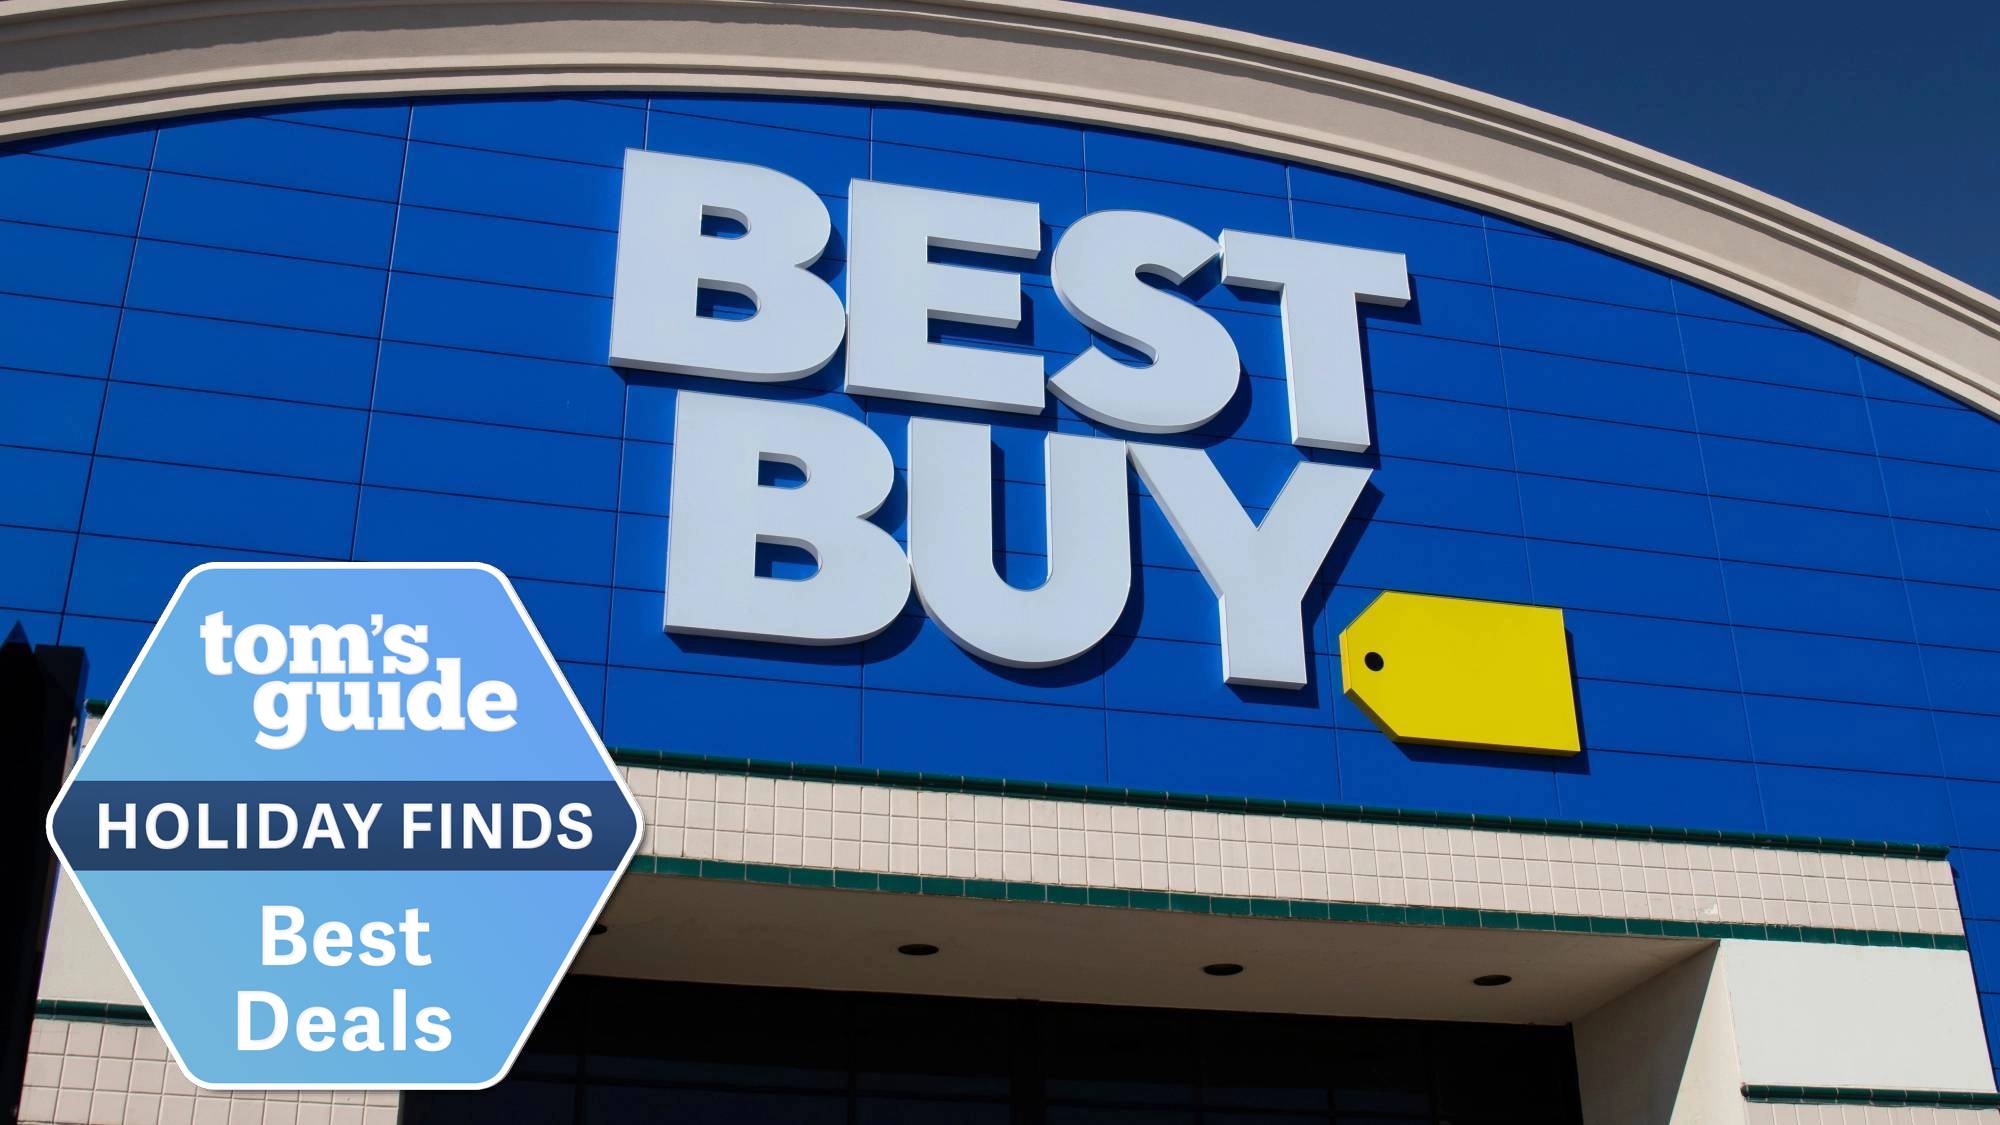 Best Buy new year sales — here's 19 top deals I recommend